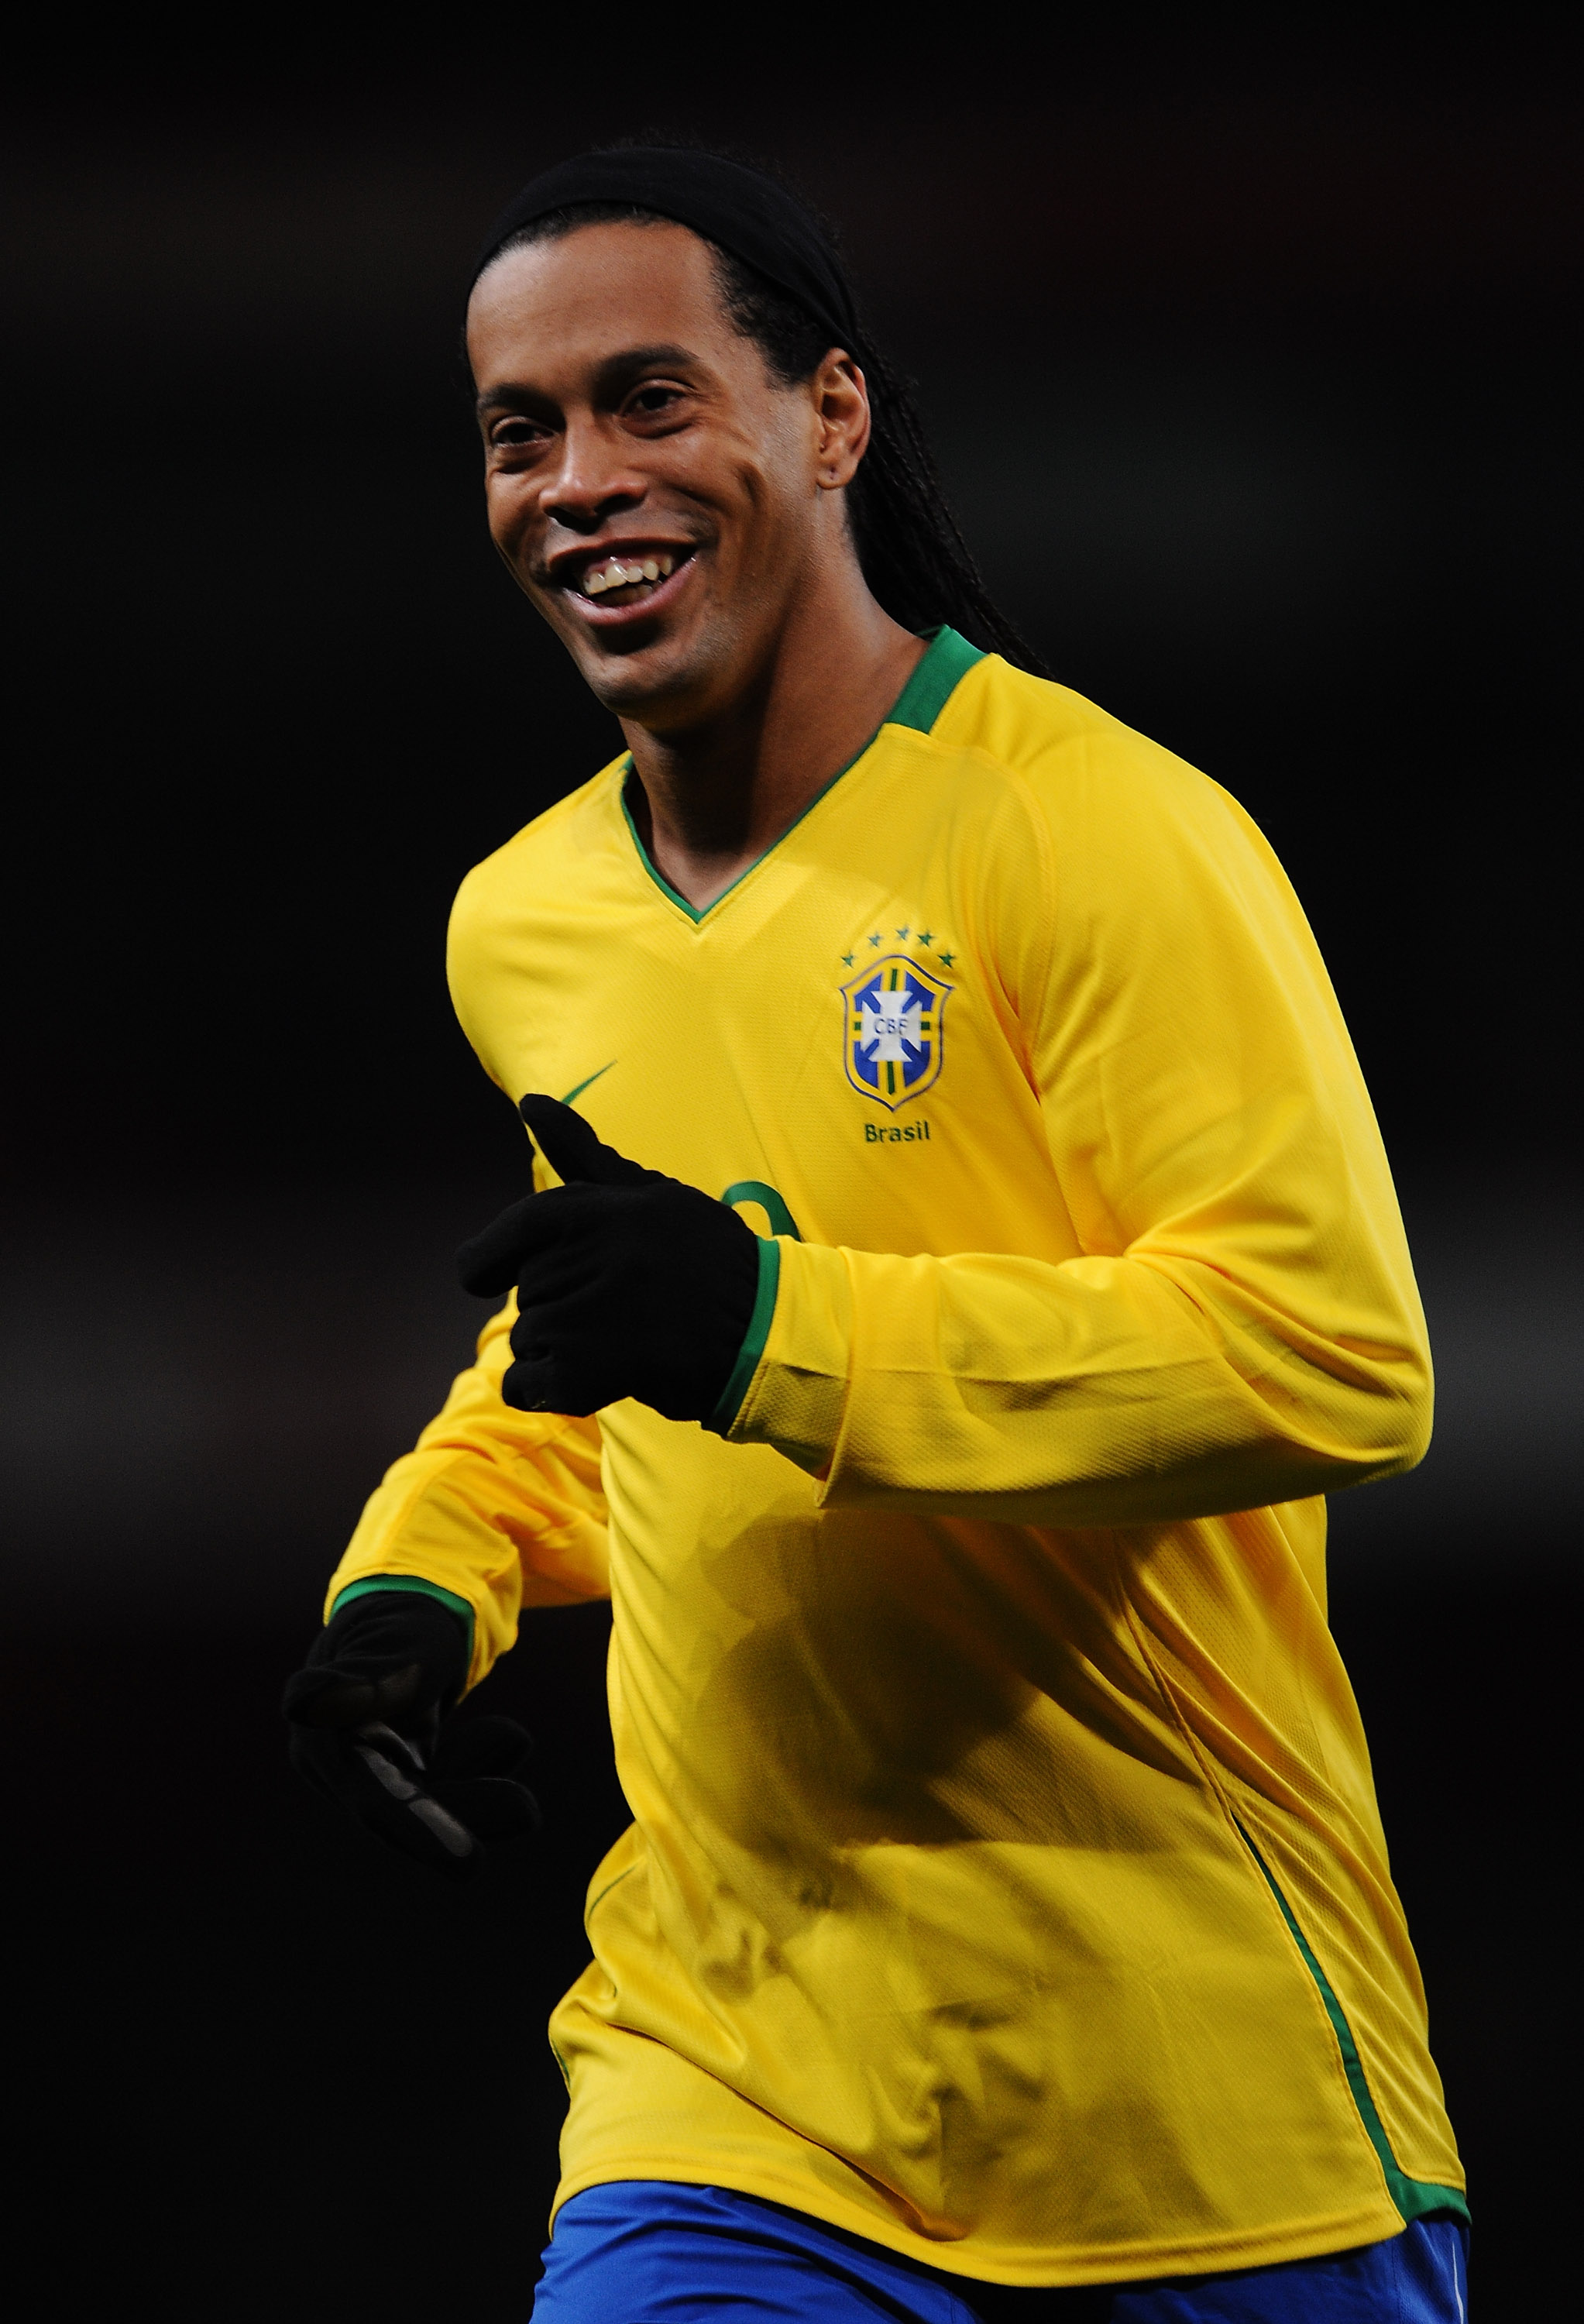 LONDON - FEBRUARY 10: Ronaldinho of Brazil smiles during the International Friendly match between Brazil and Italy at the Emirates Stadium on February 10, 2009 in London, England.  (Photo by Shaun Botterill/Getty Images)